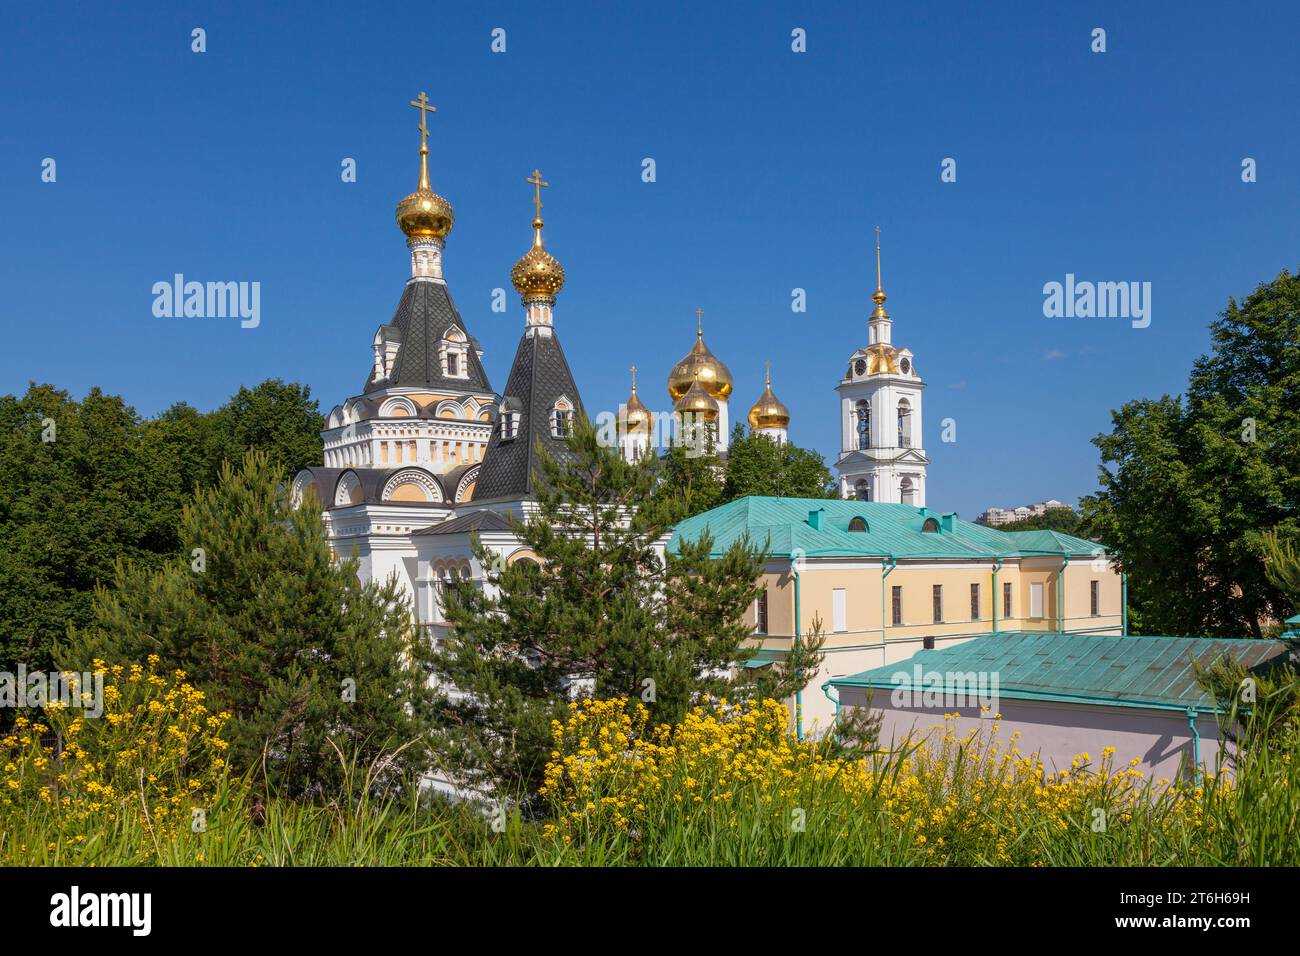 Elizabethan Church on the territory of the Kremlin in the city of Dmitrov, Russia. Stock Photo